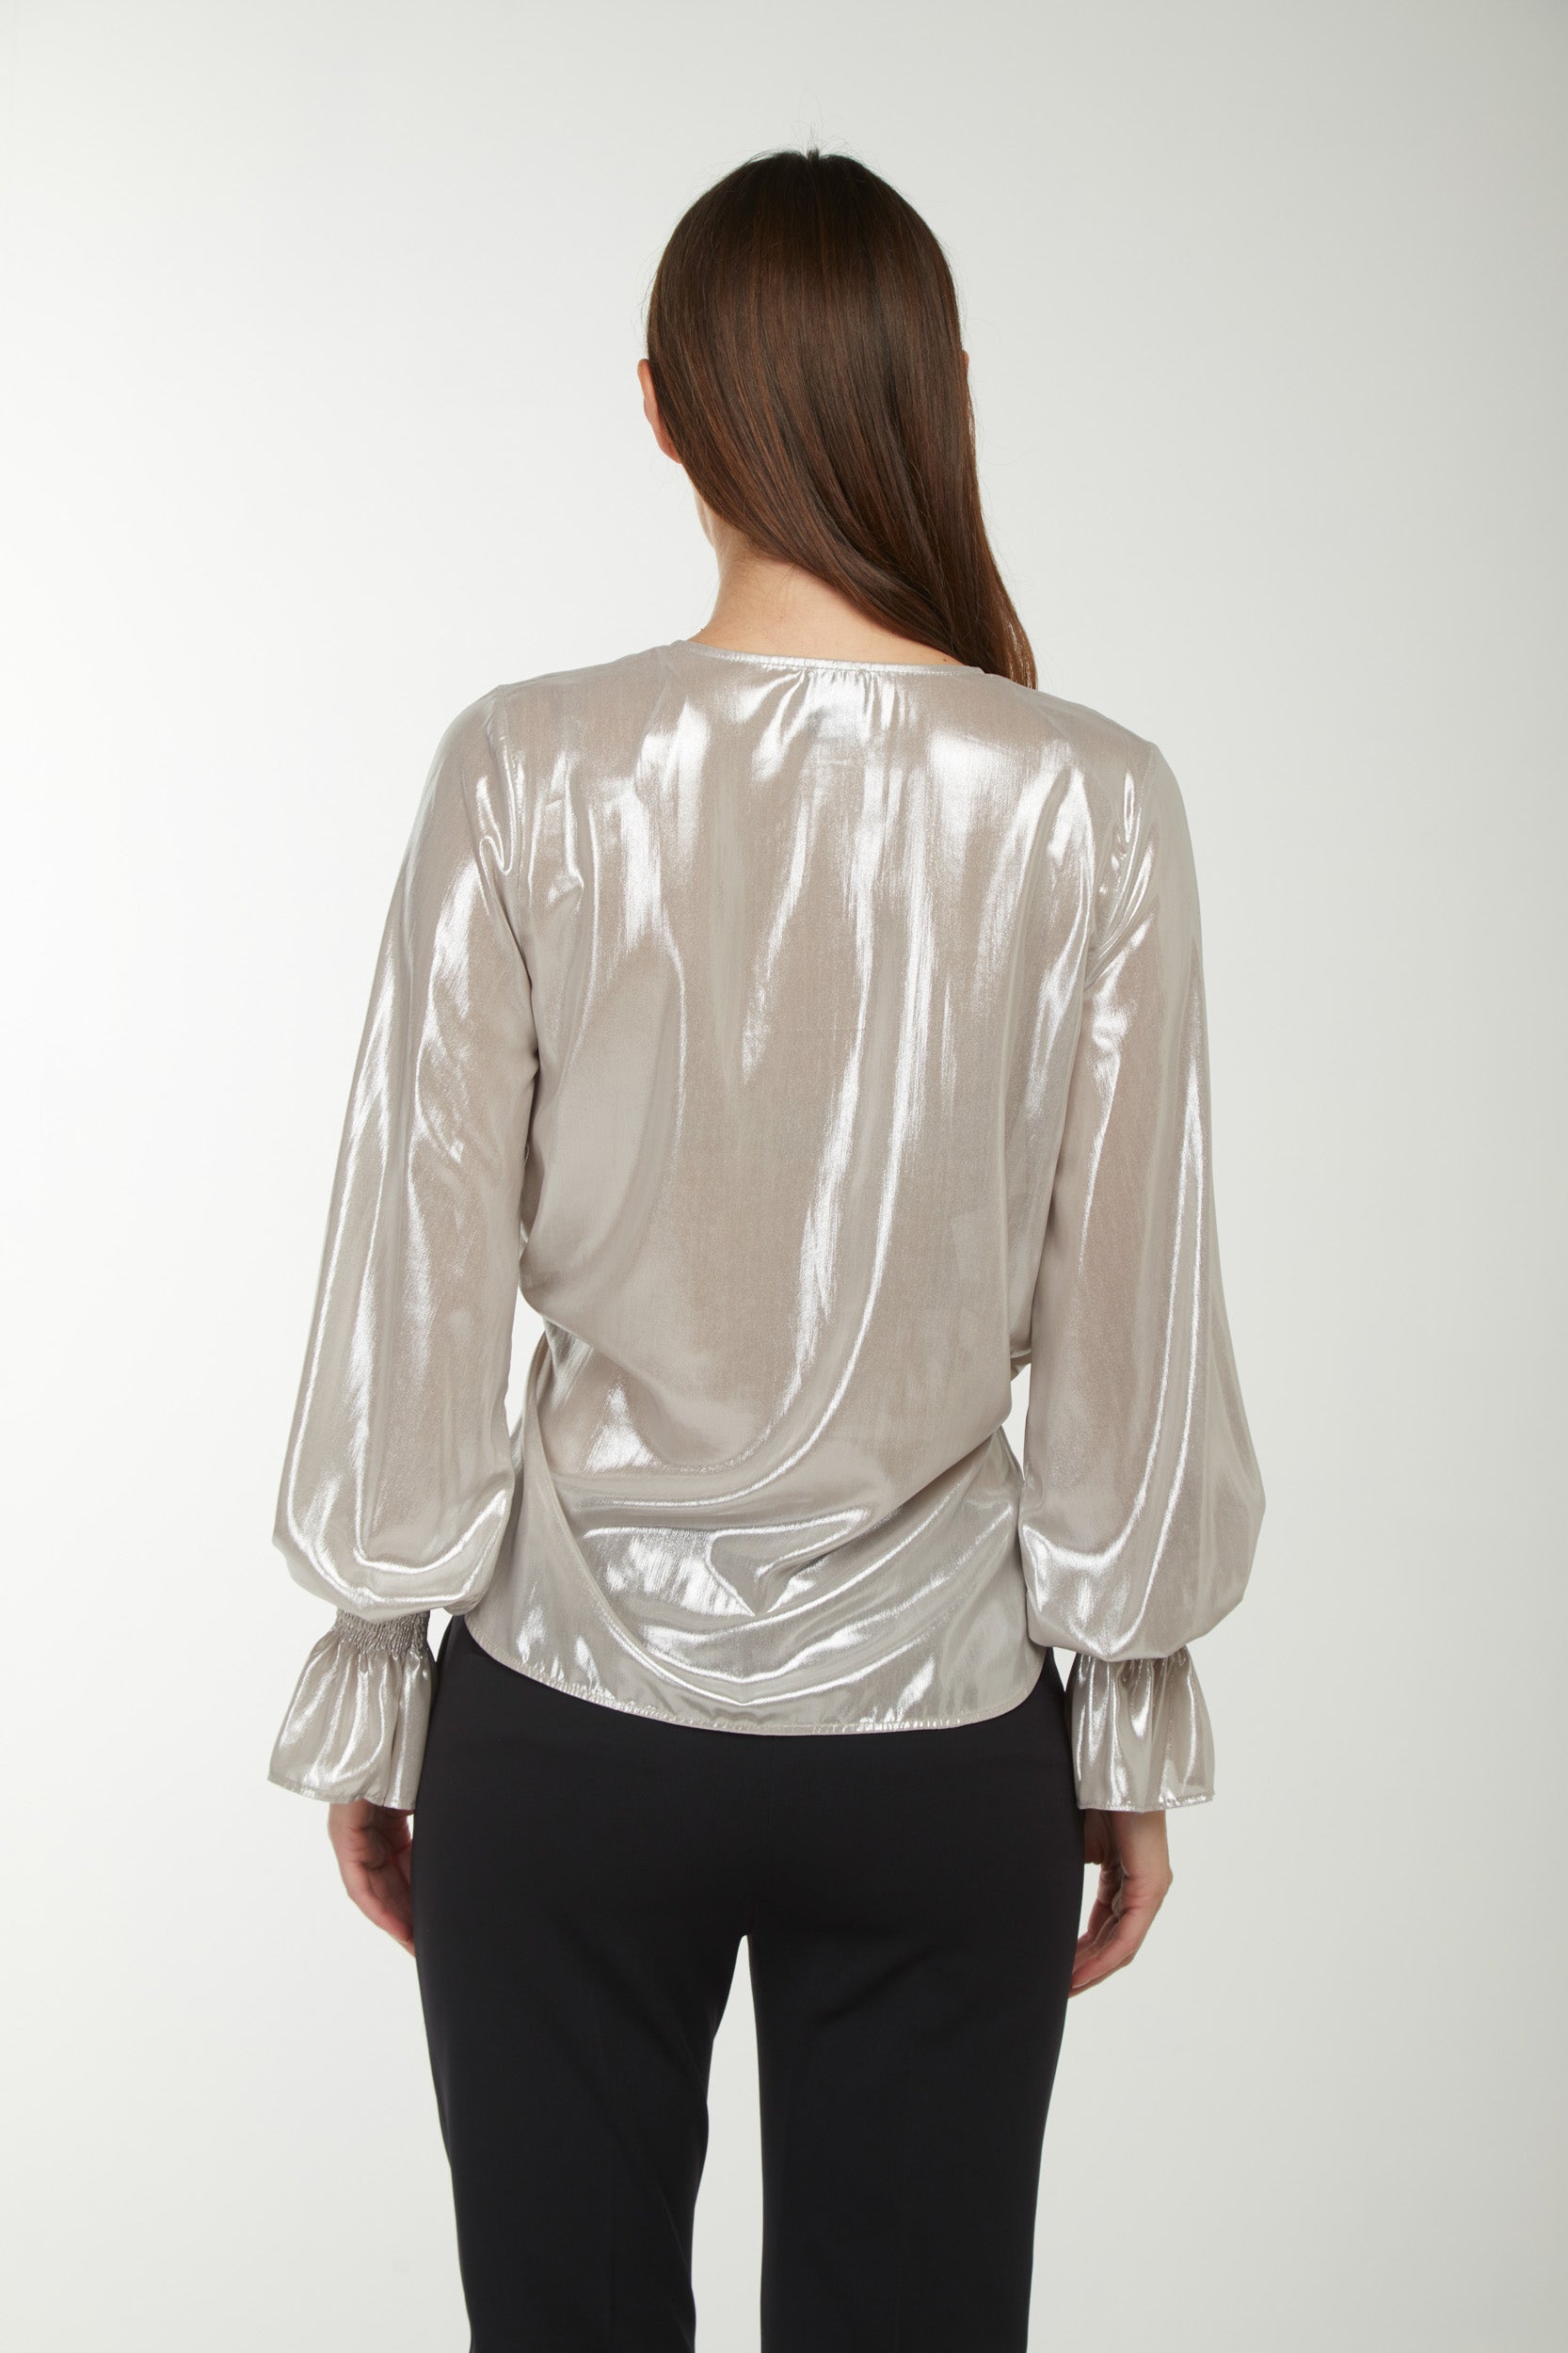 PINKO Blouse in Silver Laminated Georgette